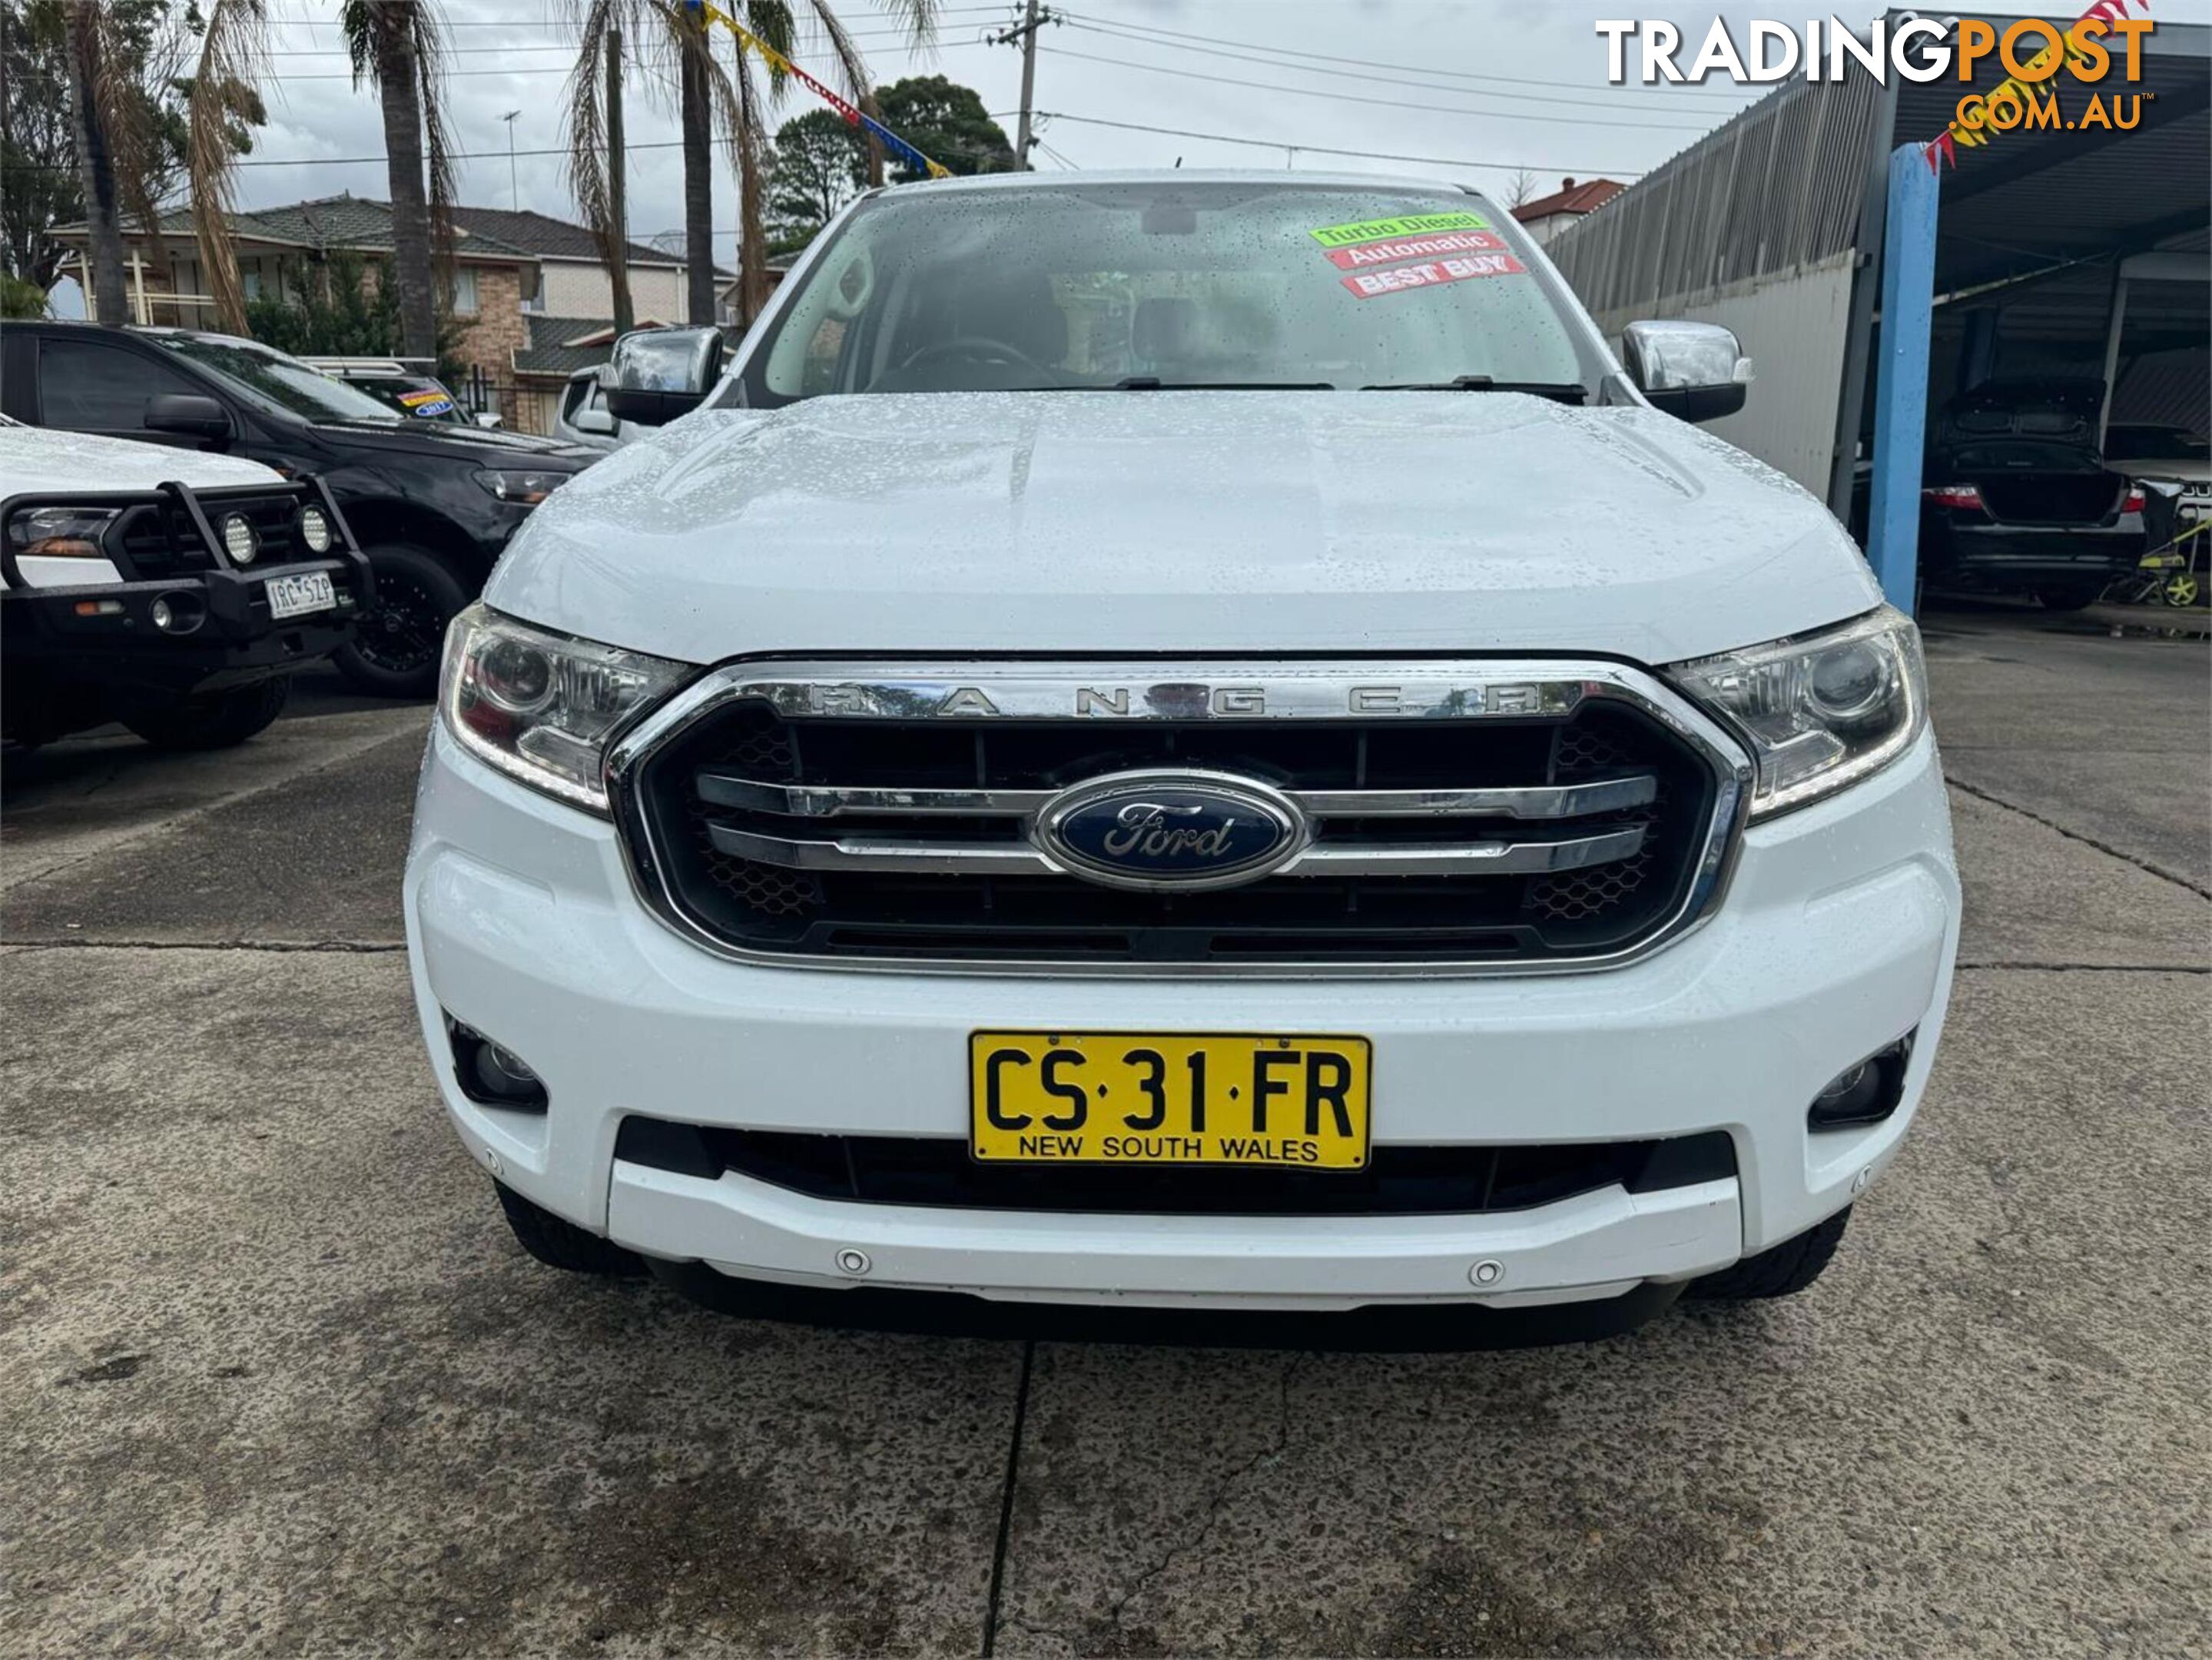 2019 FORD RANGER XLTHI RIDER PXMKIII2019 00MY UTILITY